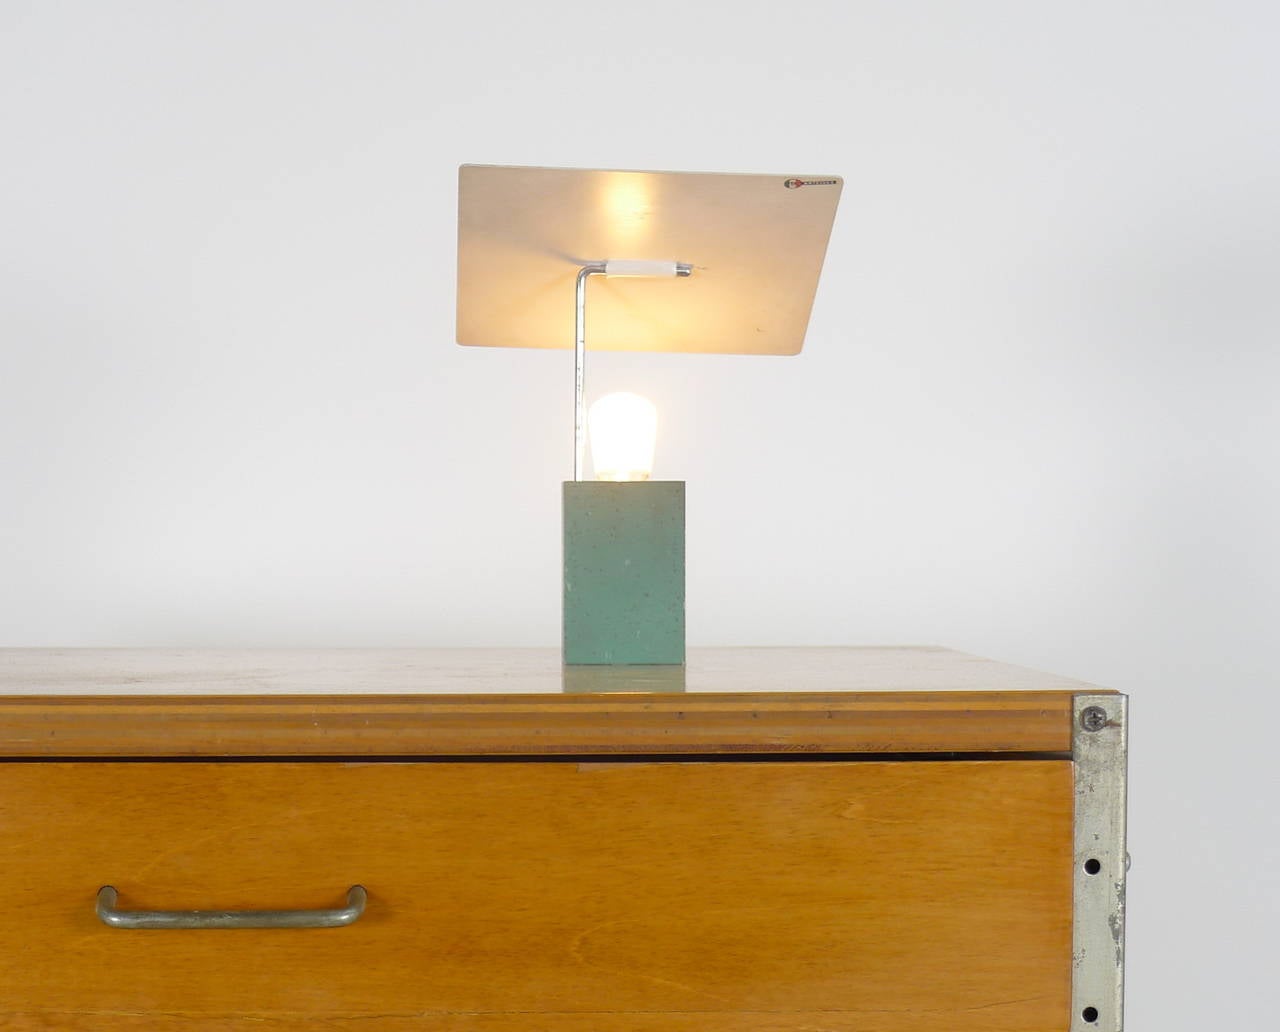 Gino Sarfatti for Arteluce, Italy, circa 1960s. Desk lamp with heavy cast base retaining it's original green paint, shade retained by a single chromed arm which swivels and coupled with the ability of the square metal shade to articulate means the